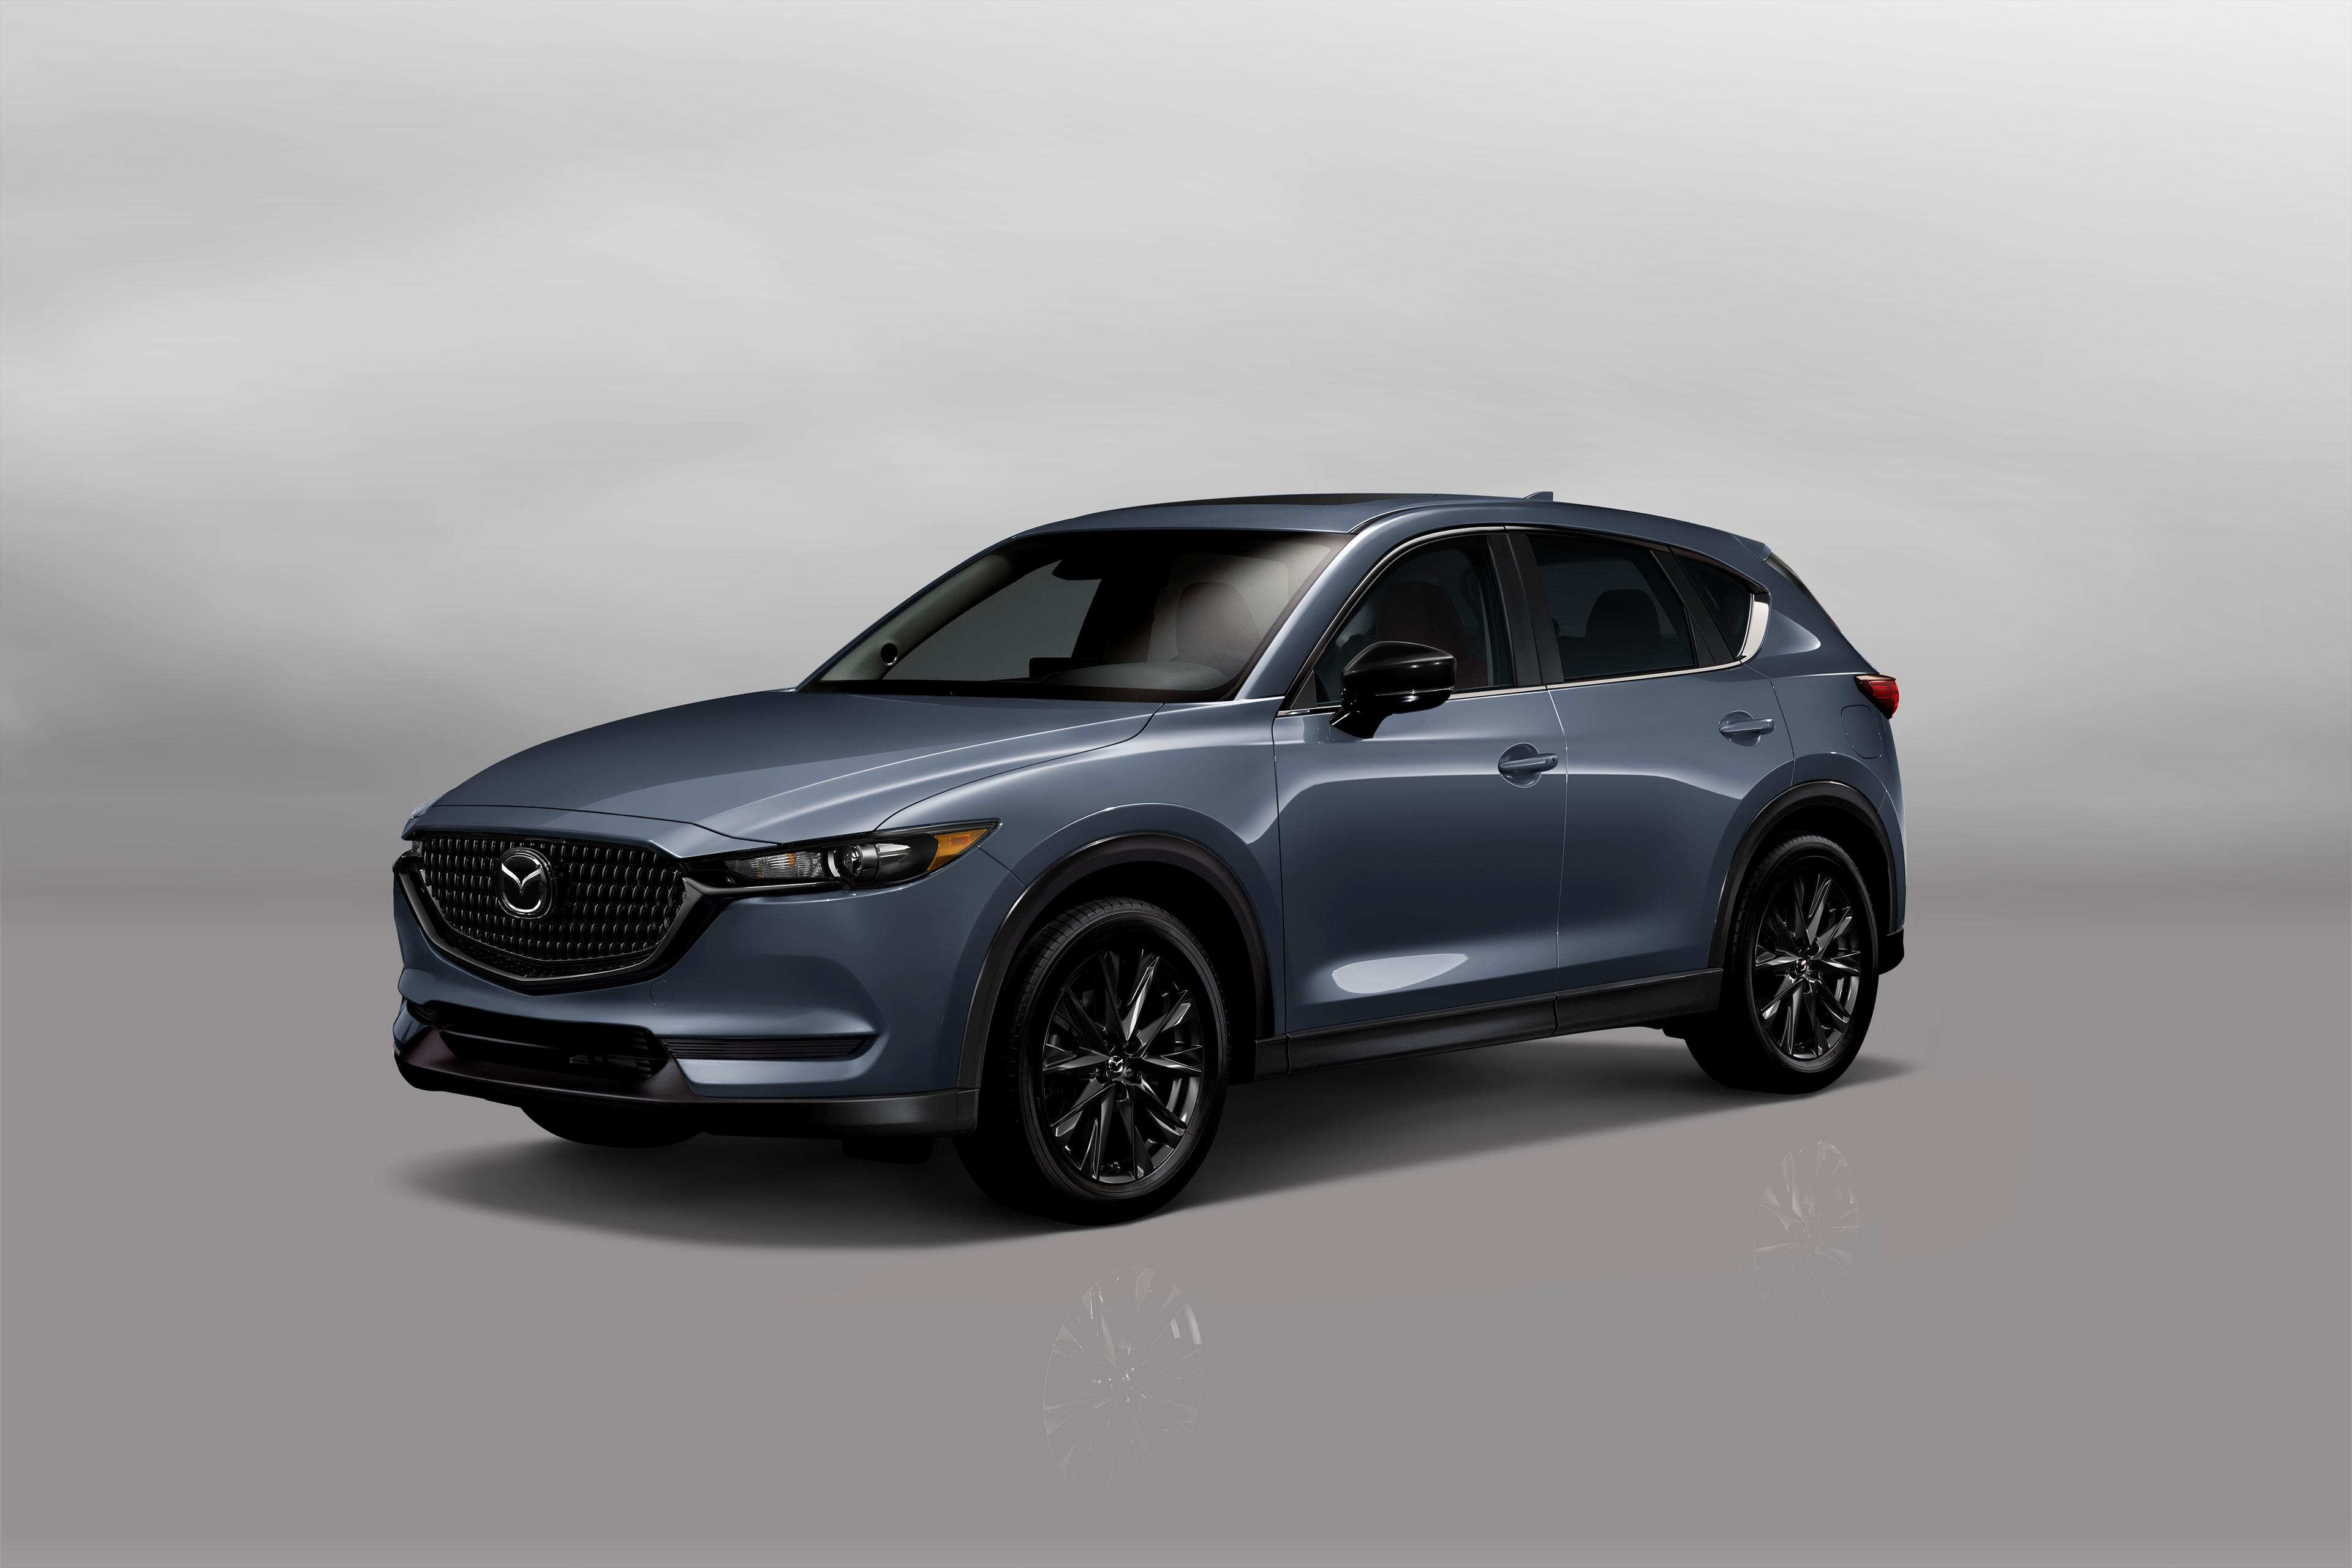 The 2021 Mazda CX-5 has gotten a lot of love from both critics and consumers.